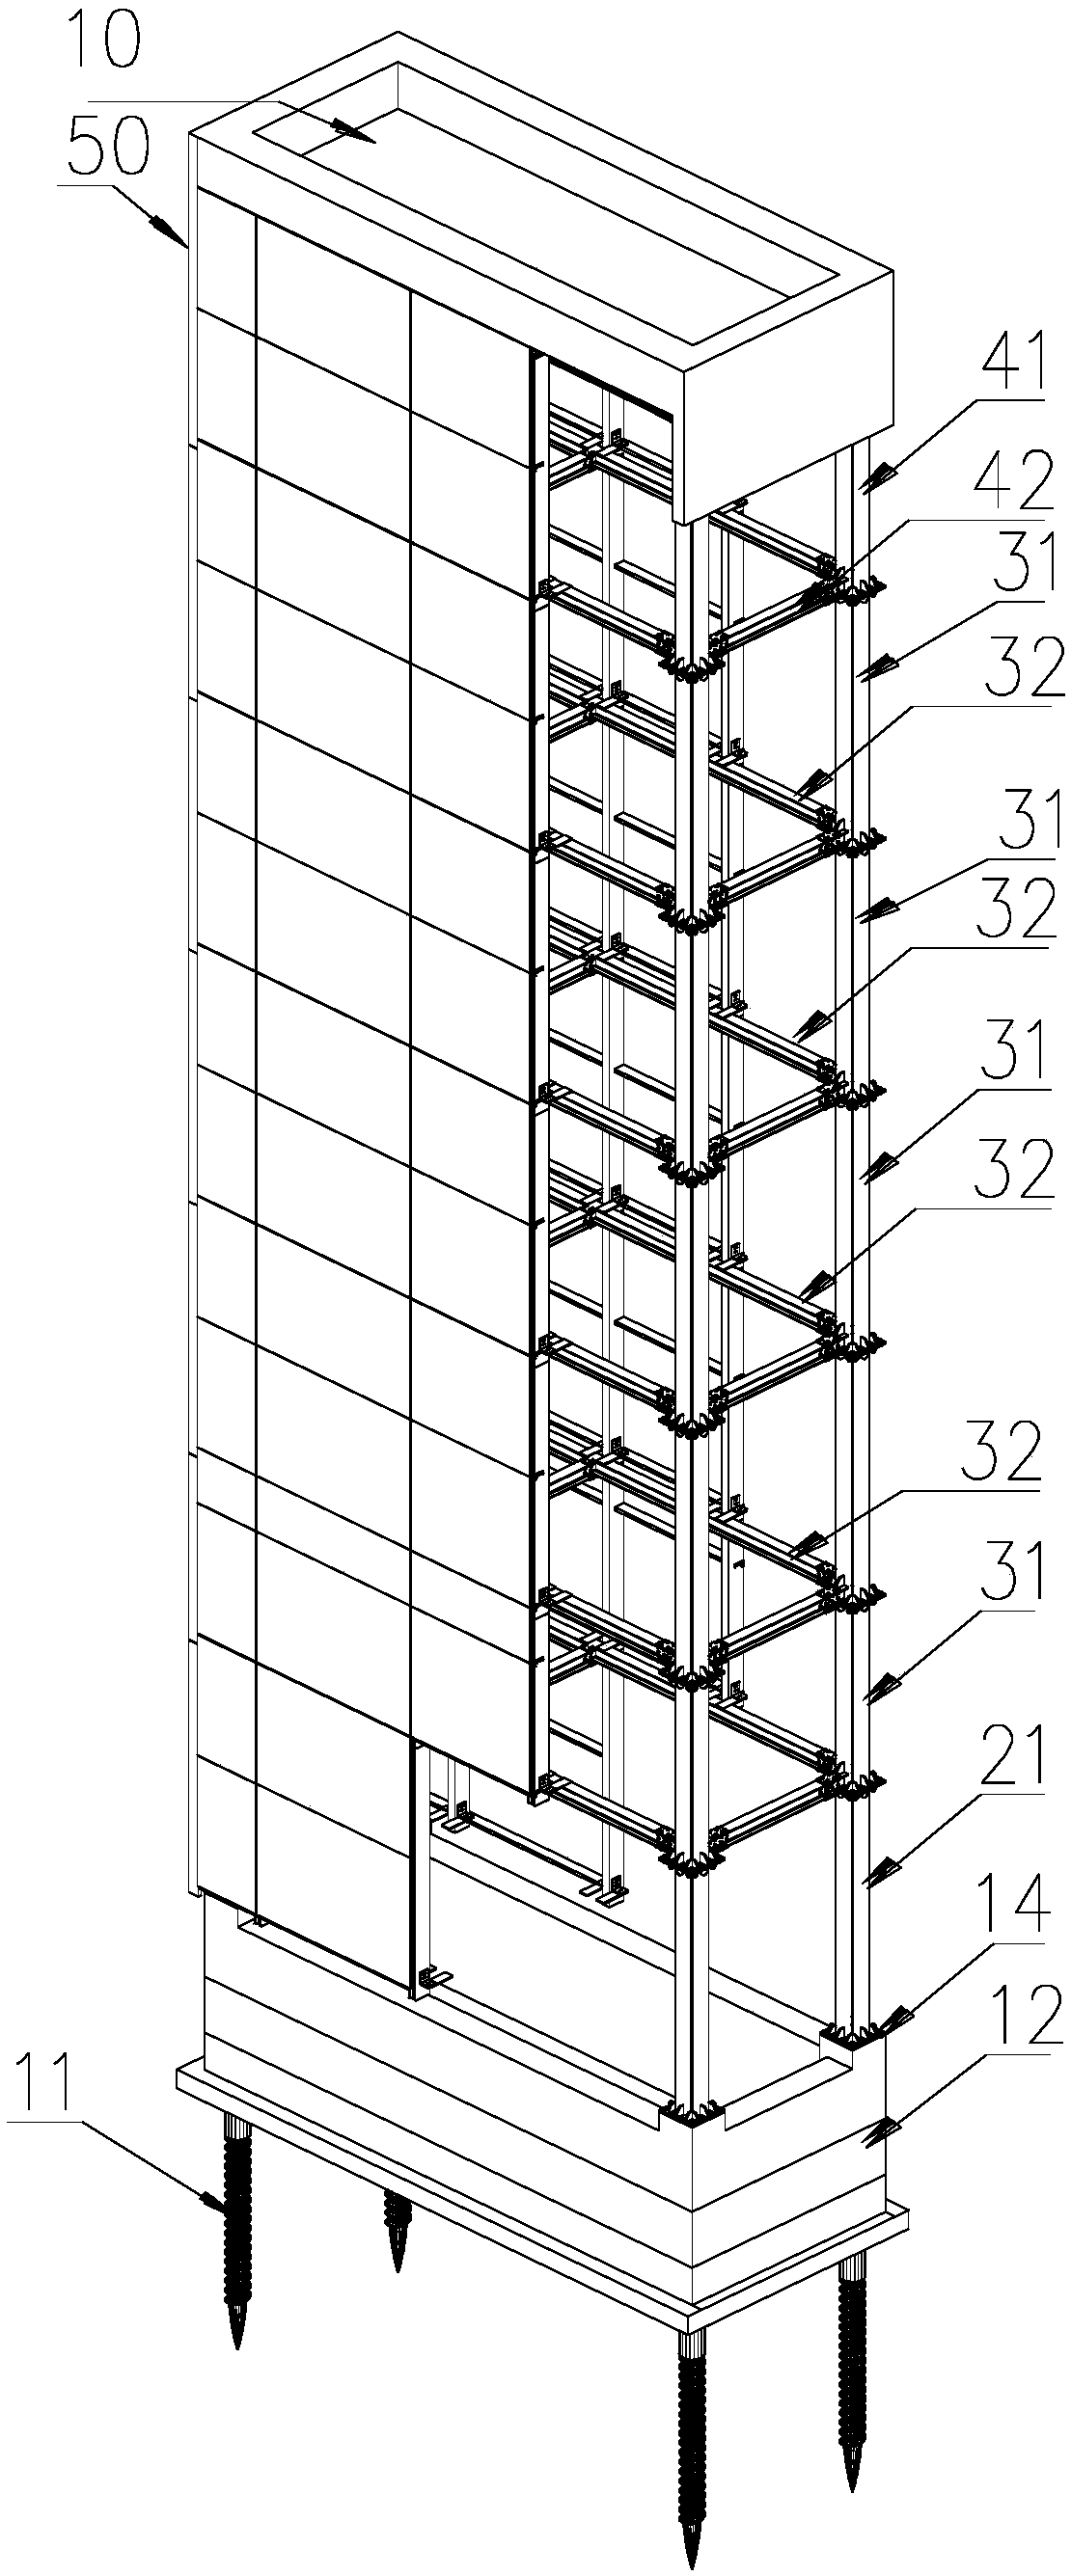 Assembly type additional lift shaft structure adapting to jacking construction